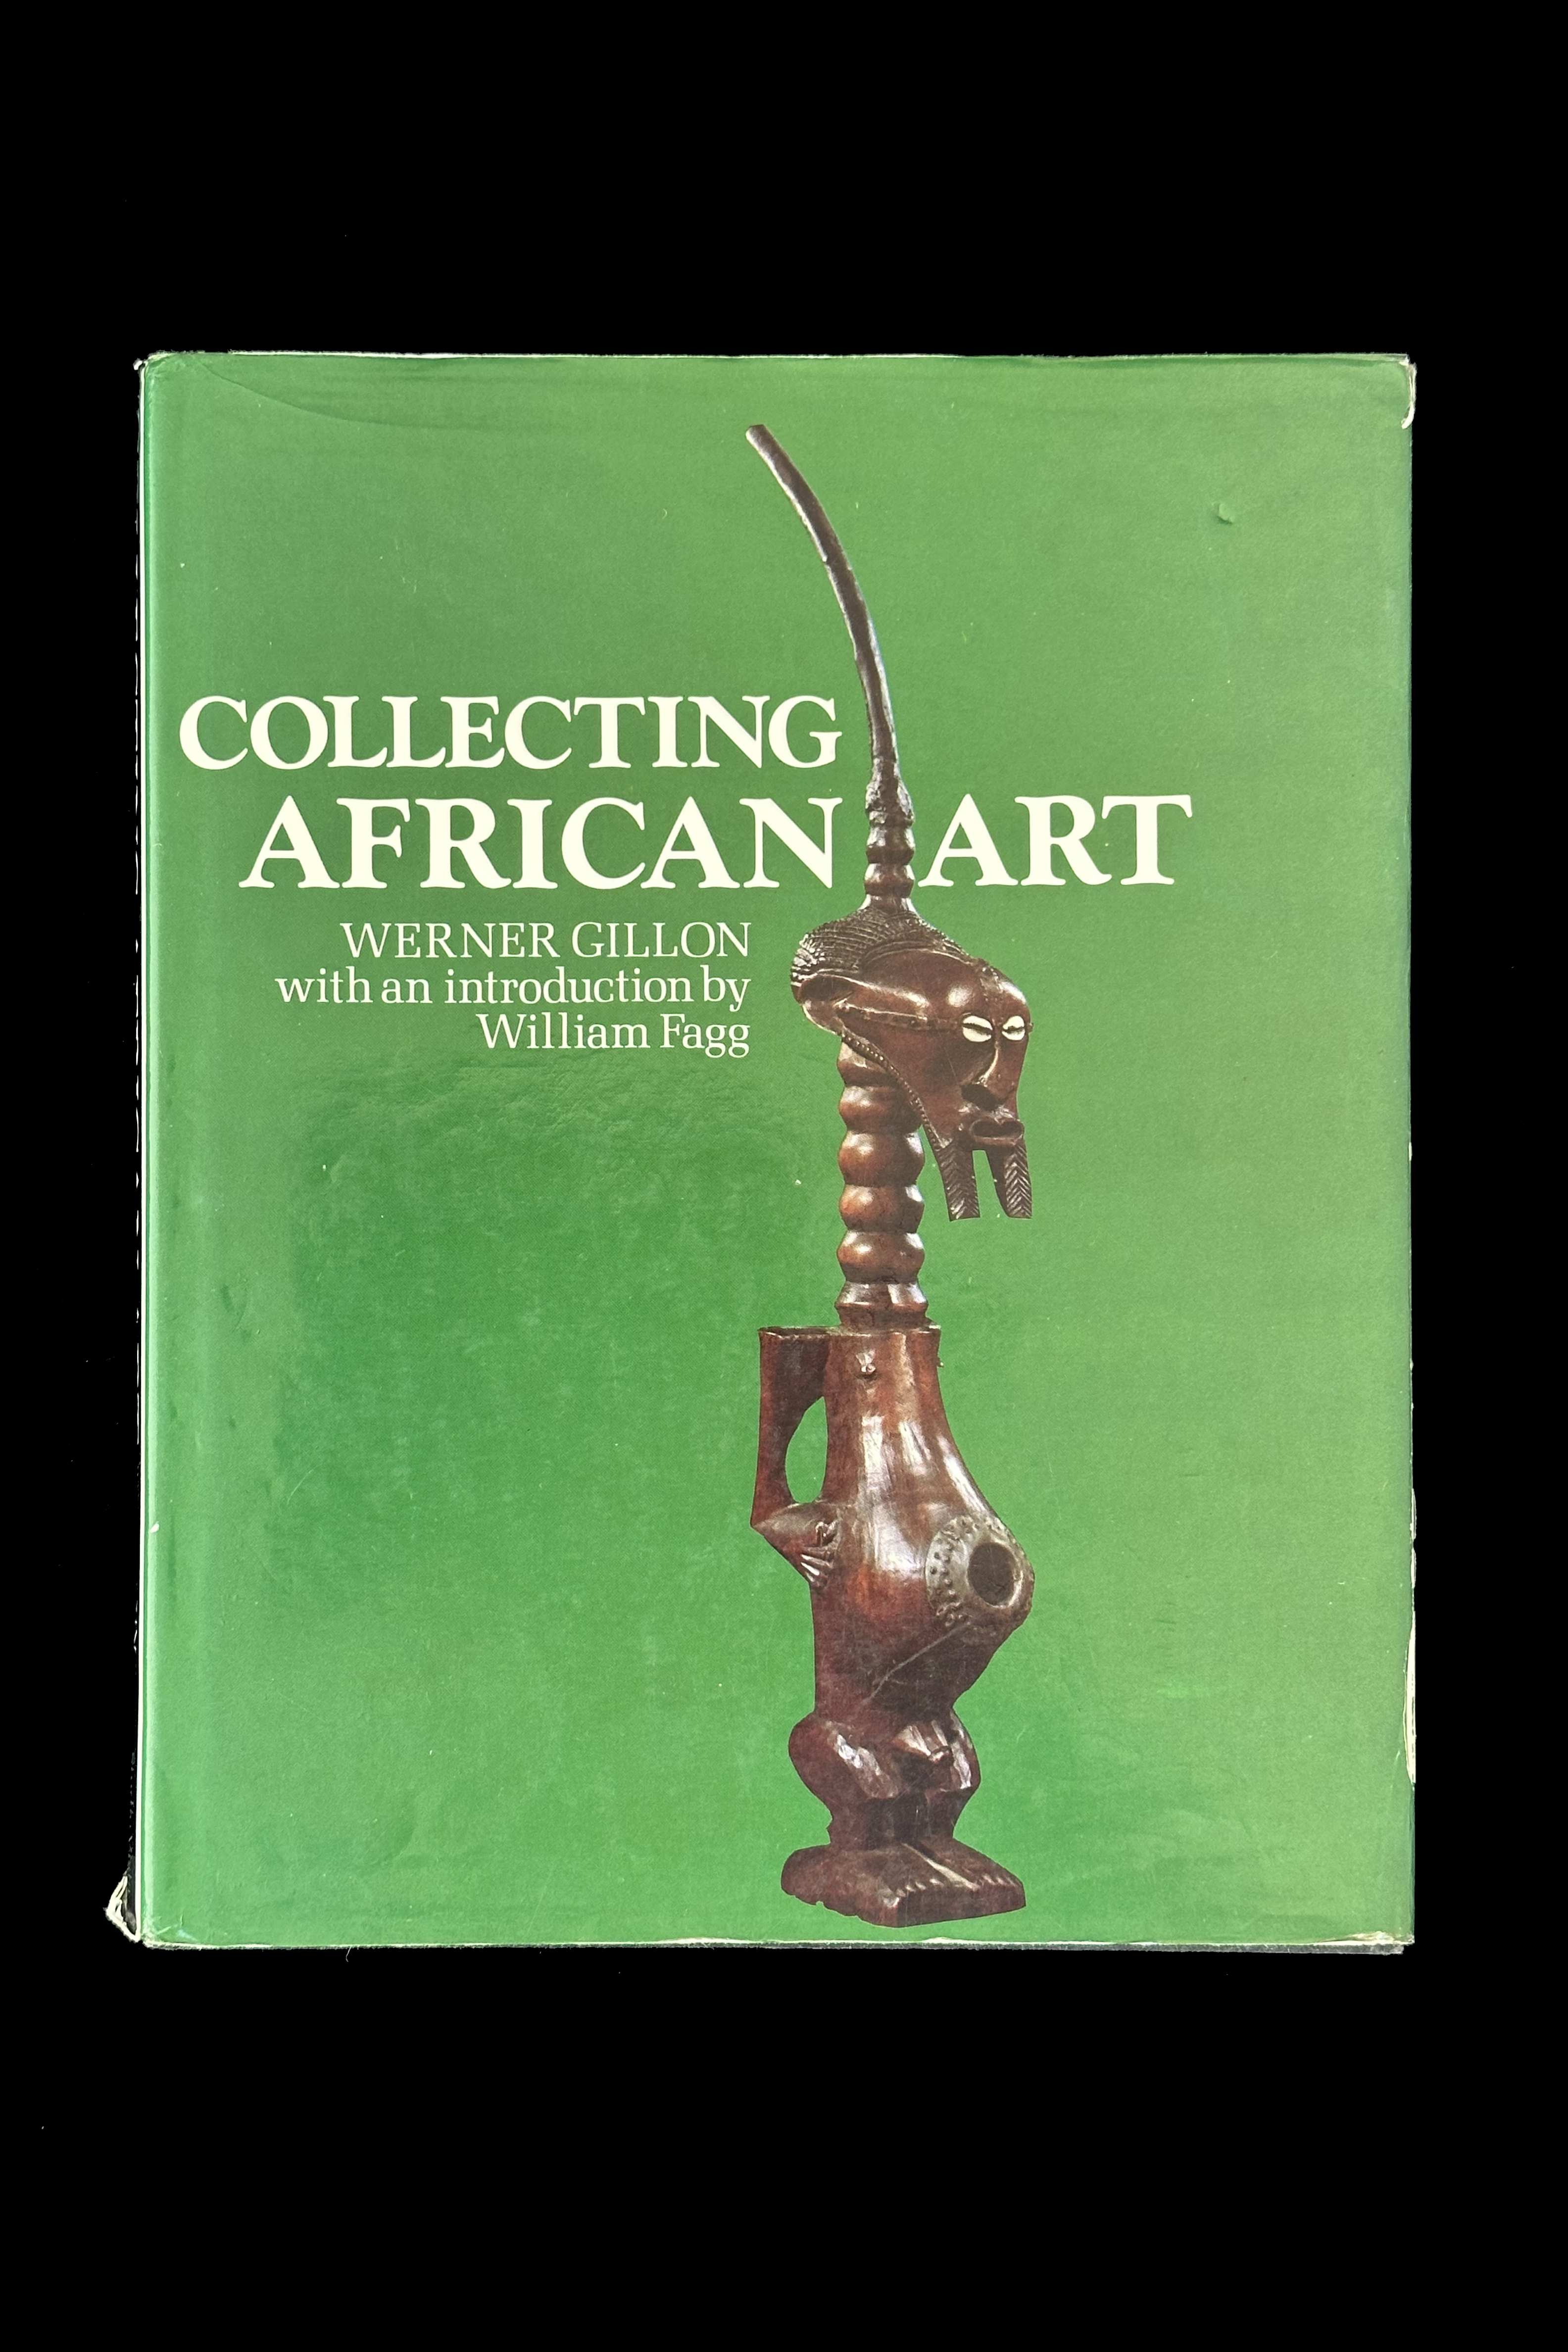 Collecting African Art - by Werner Gillon